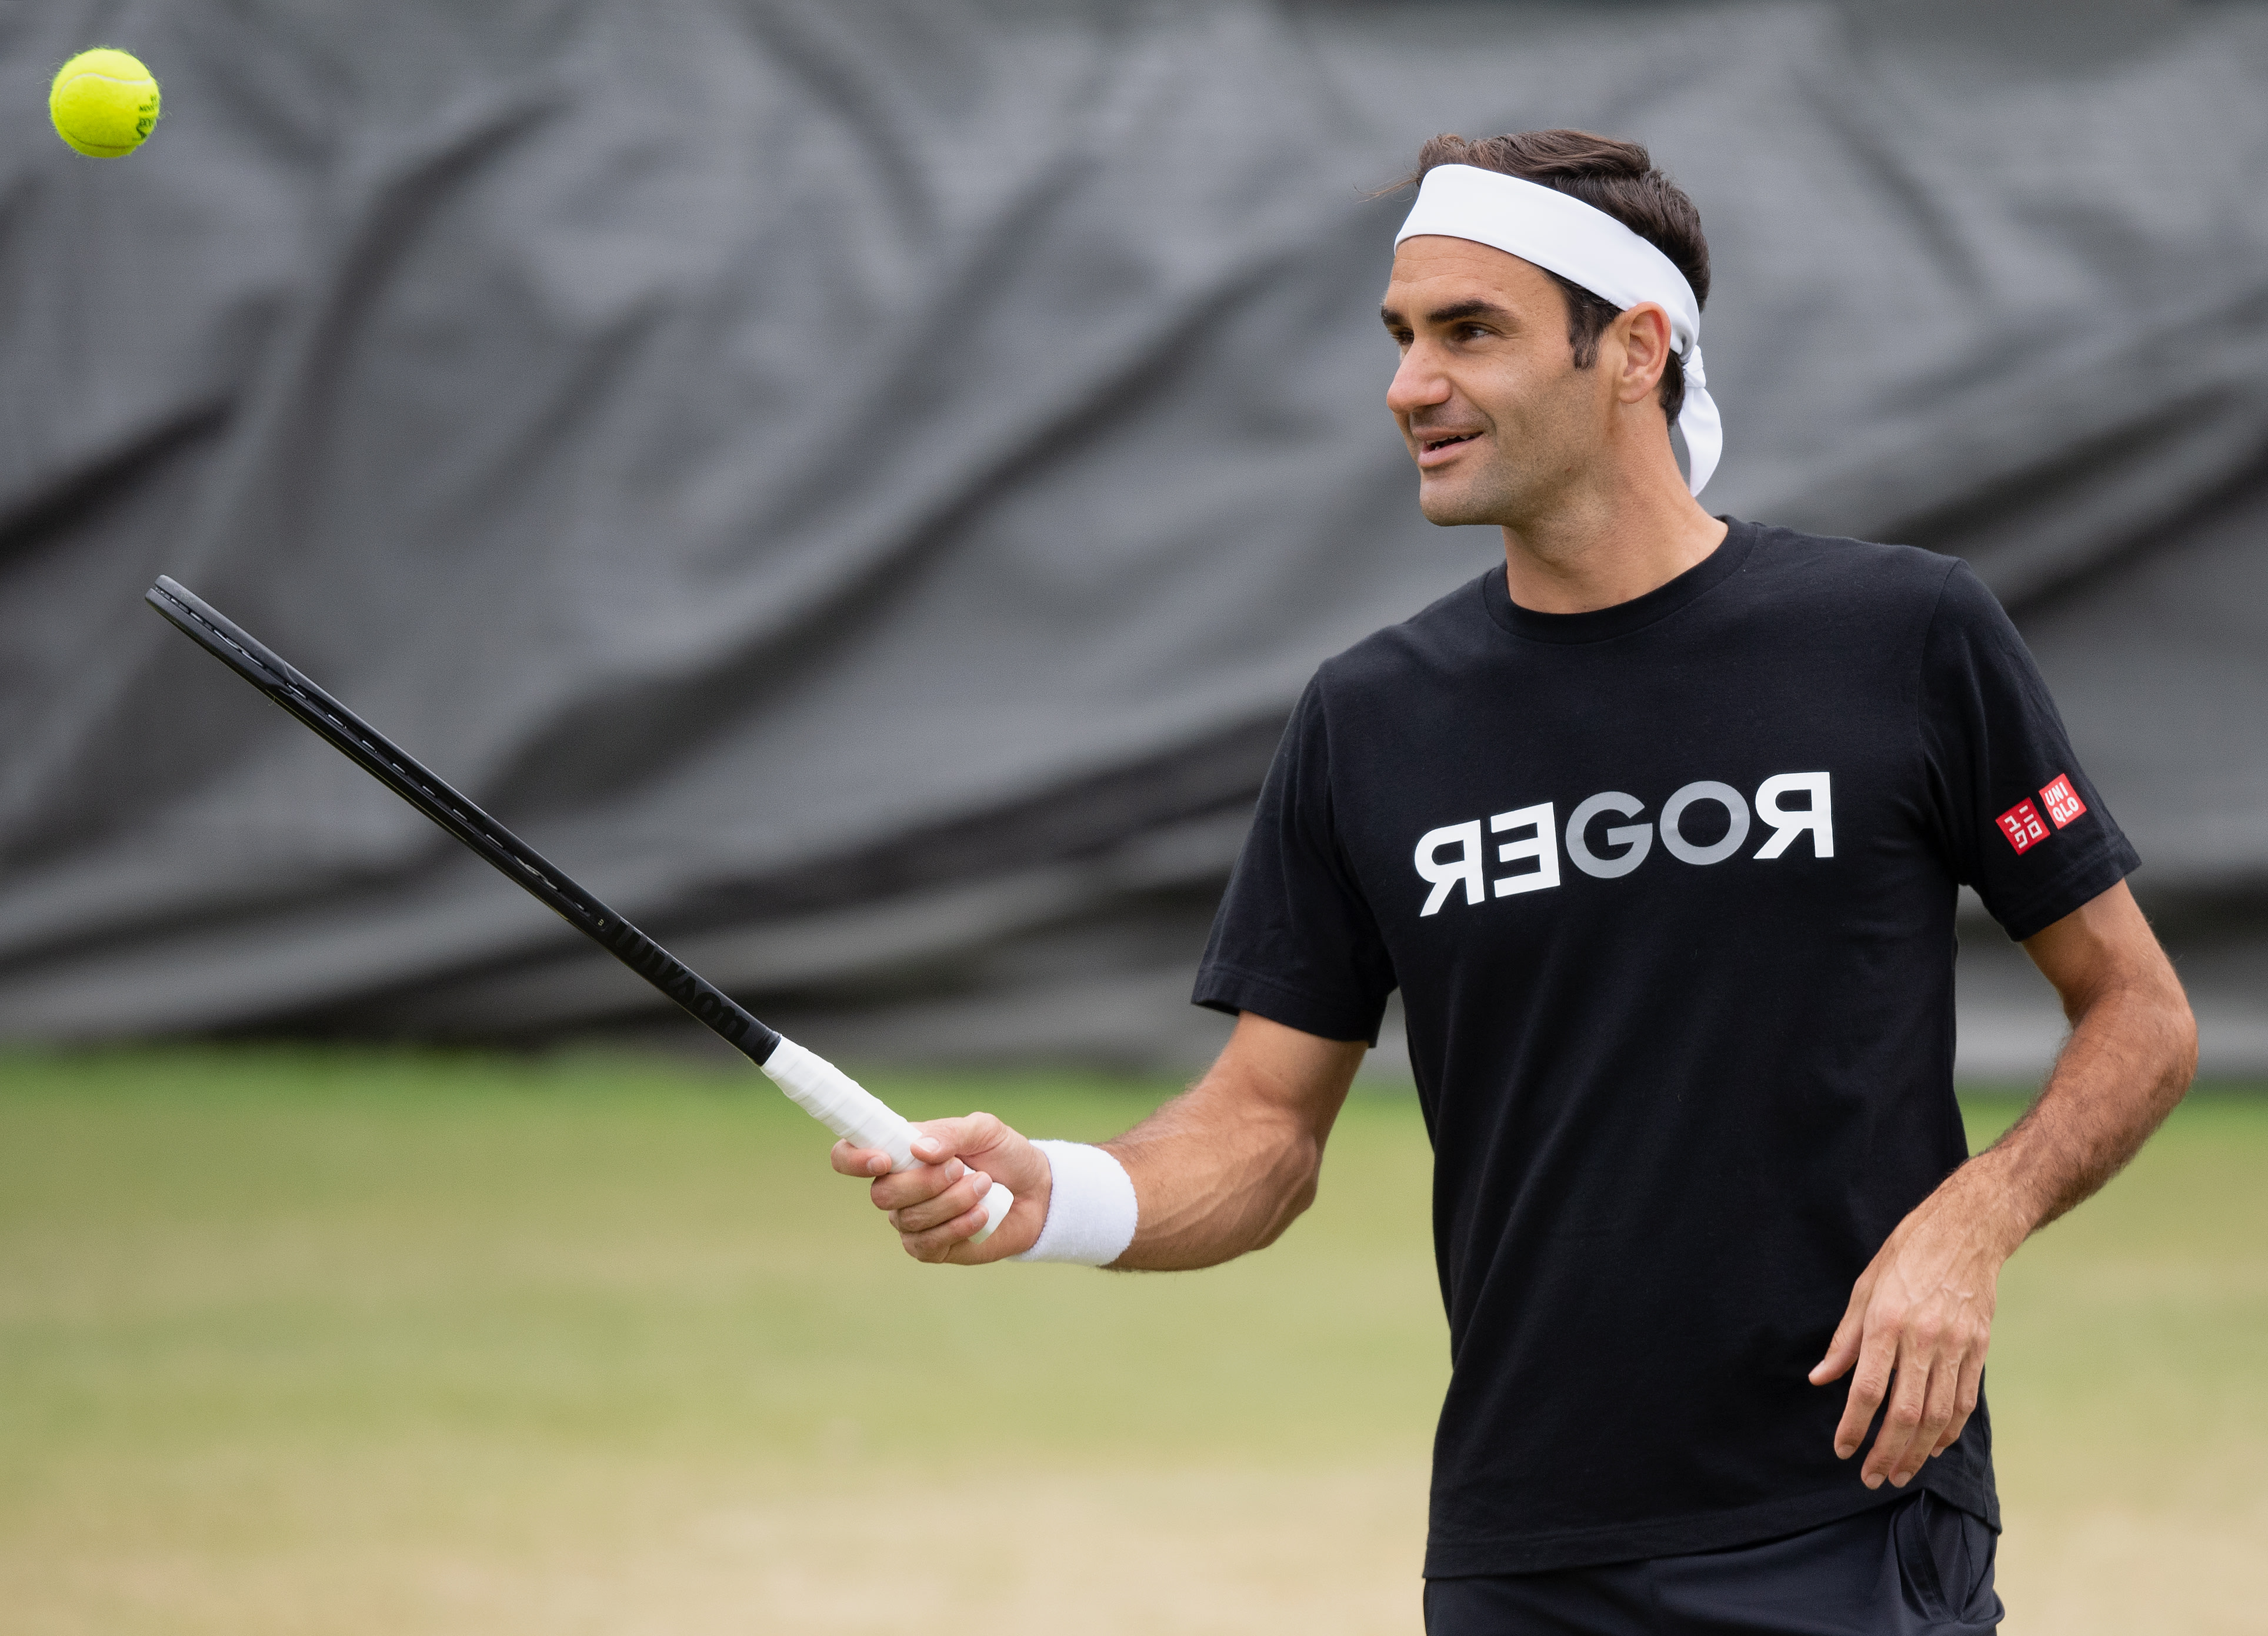 Few athletes have changed their sport for the better in as many ways as Roger Federer